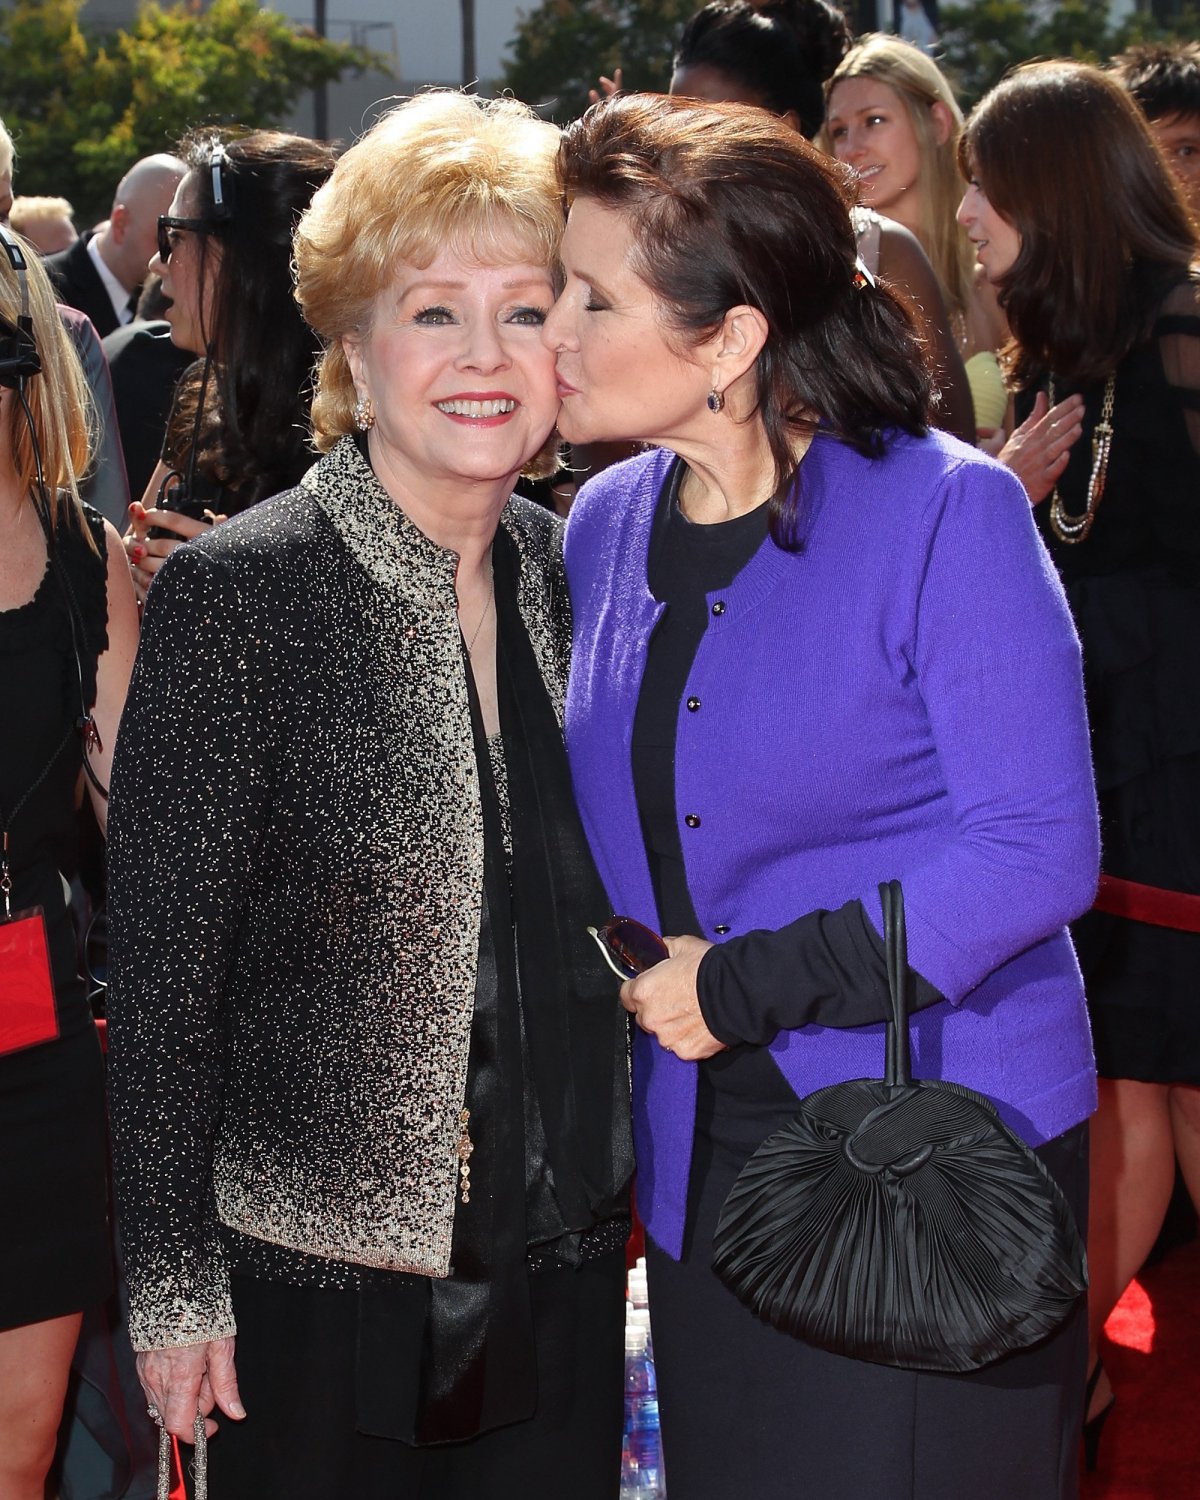 DEBBIE REYNOLDS & DAUGHTER CARRIE FISHER IN 2011 - 8X10 PUBLICITY PHOTO (ZY-707)